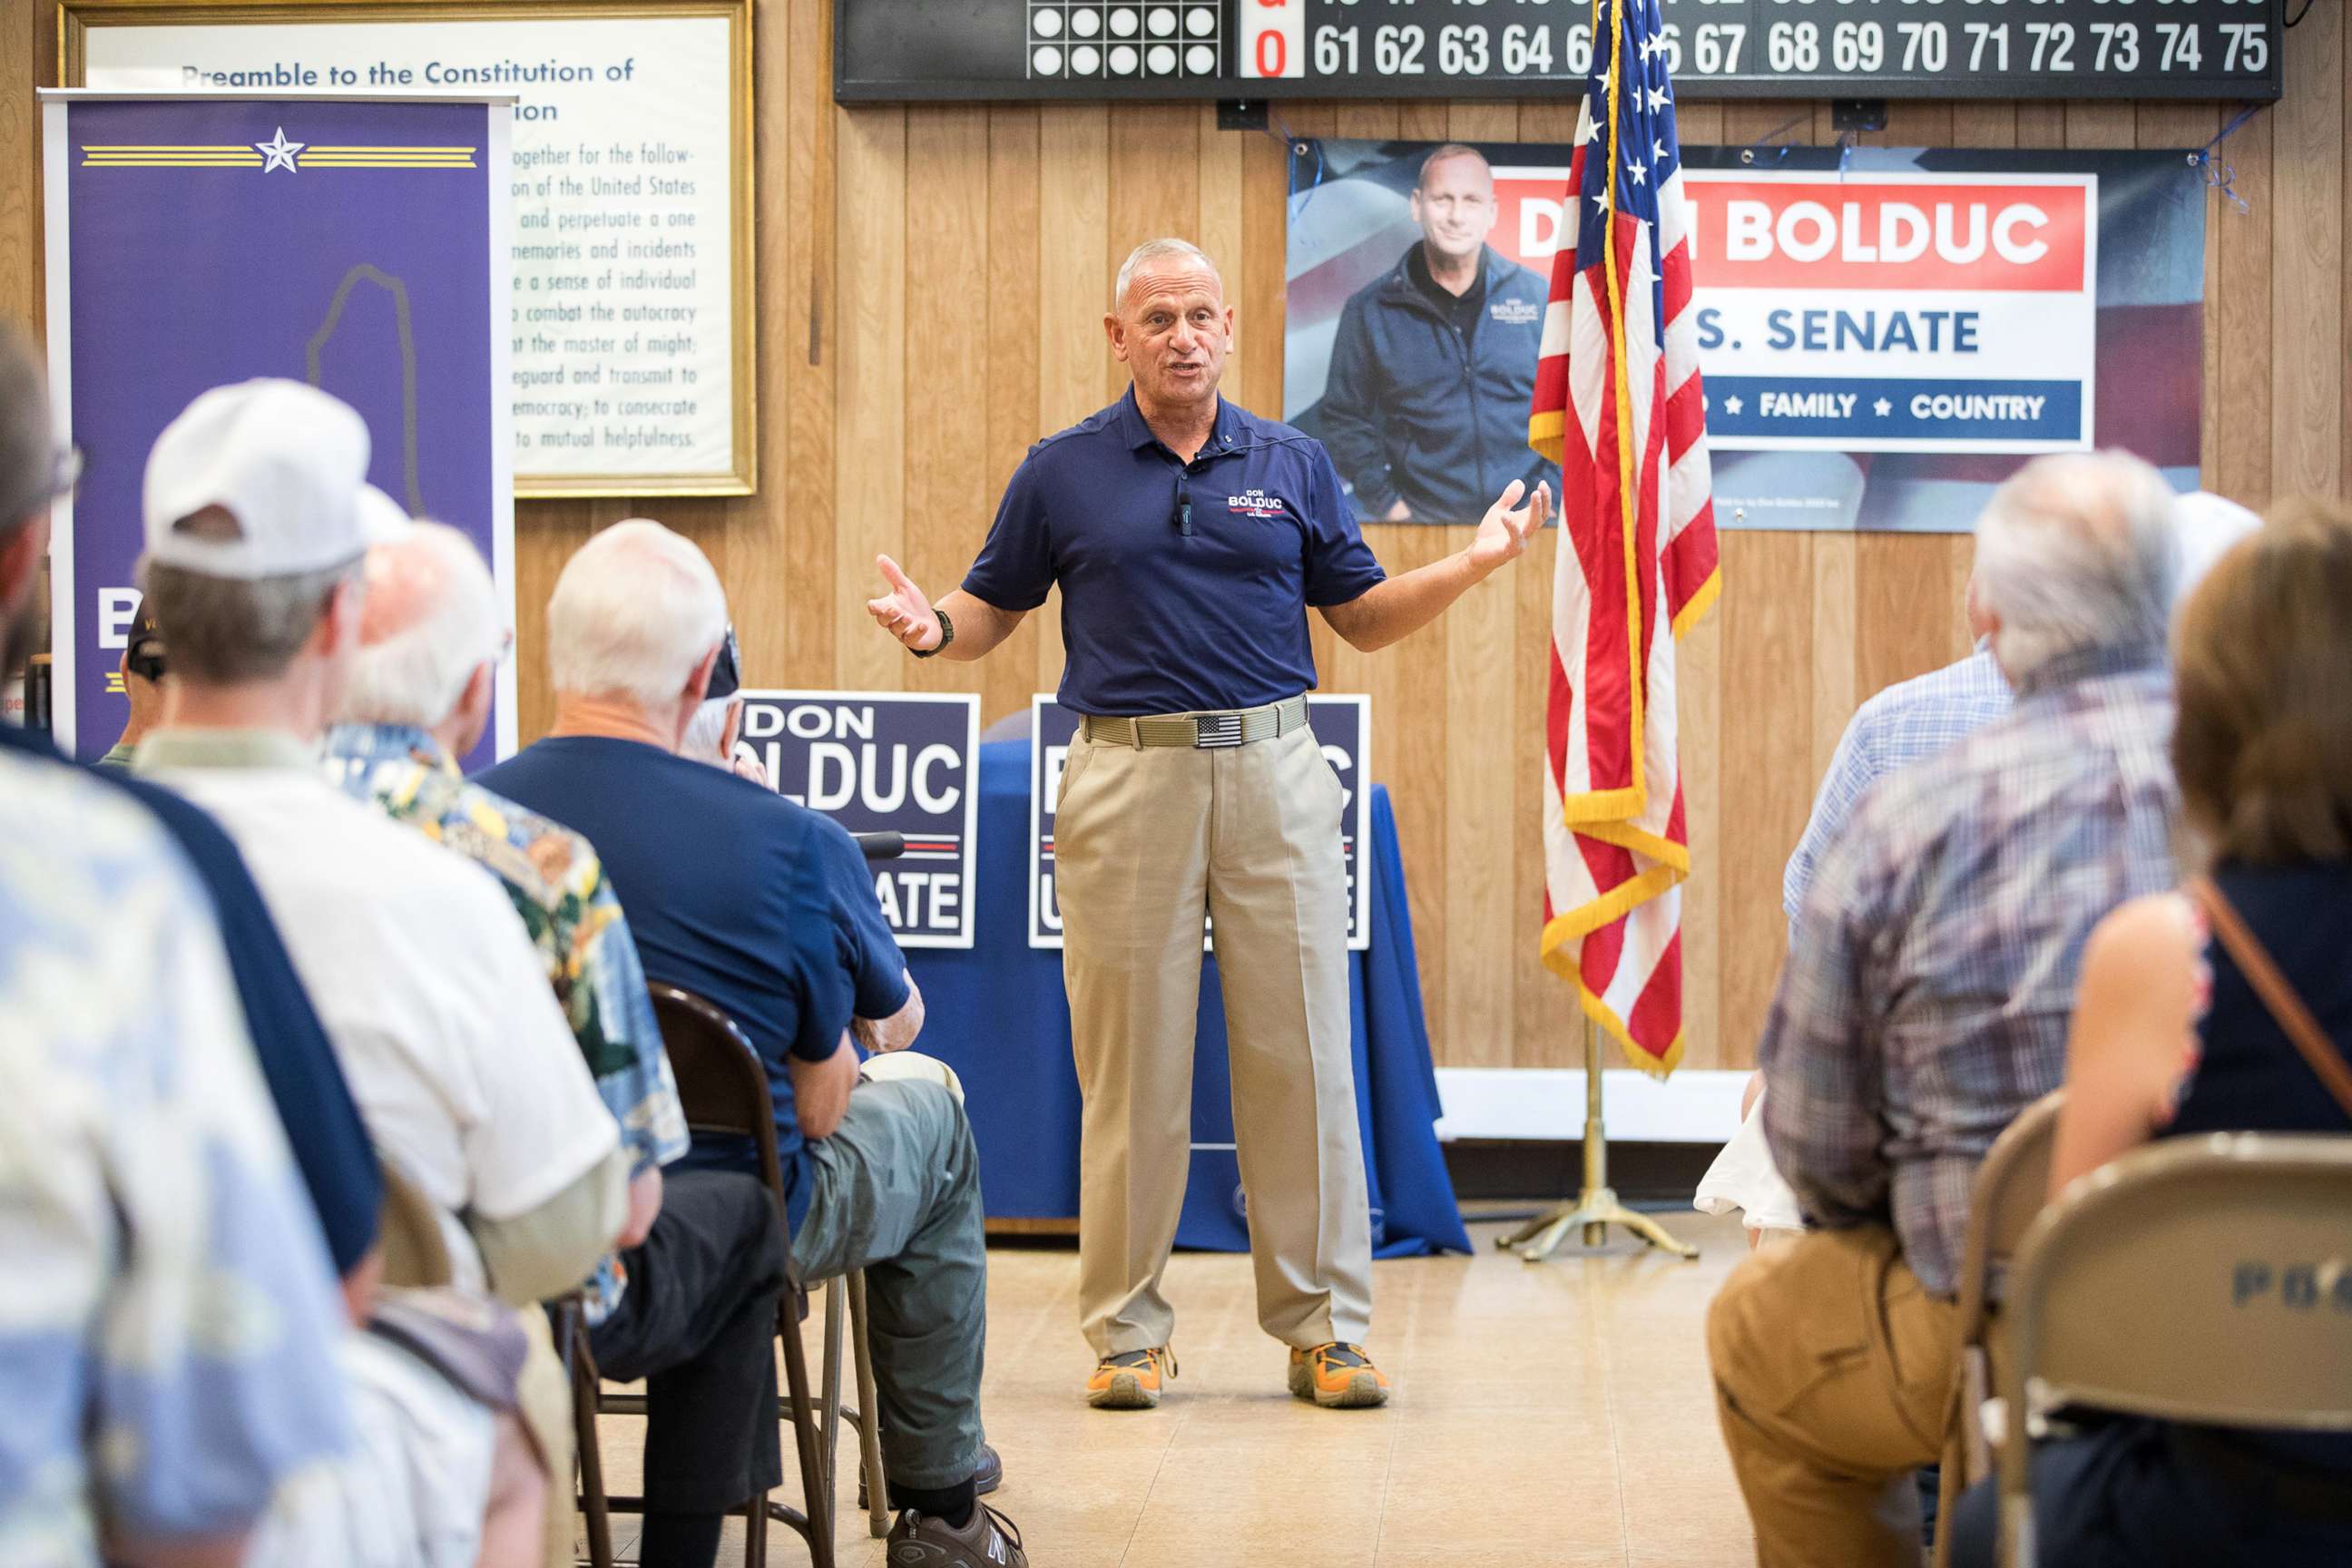 PHOTO: Republican Senate candidate Don Bolduc greets supporters at a town hall event, Sept. 10, 2022, in Laconia, N.H. 